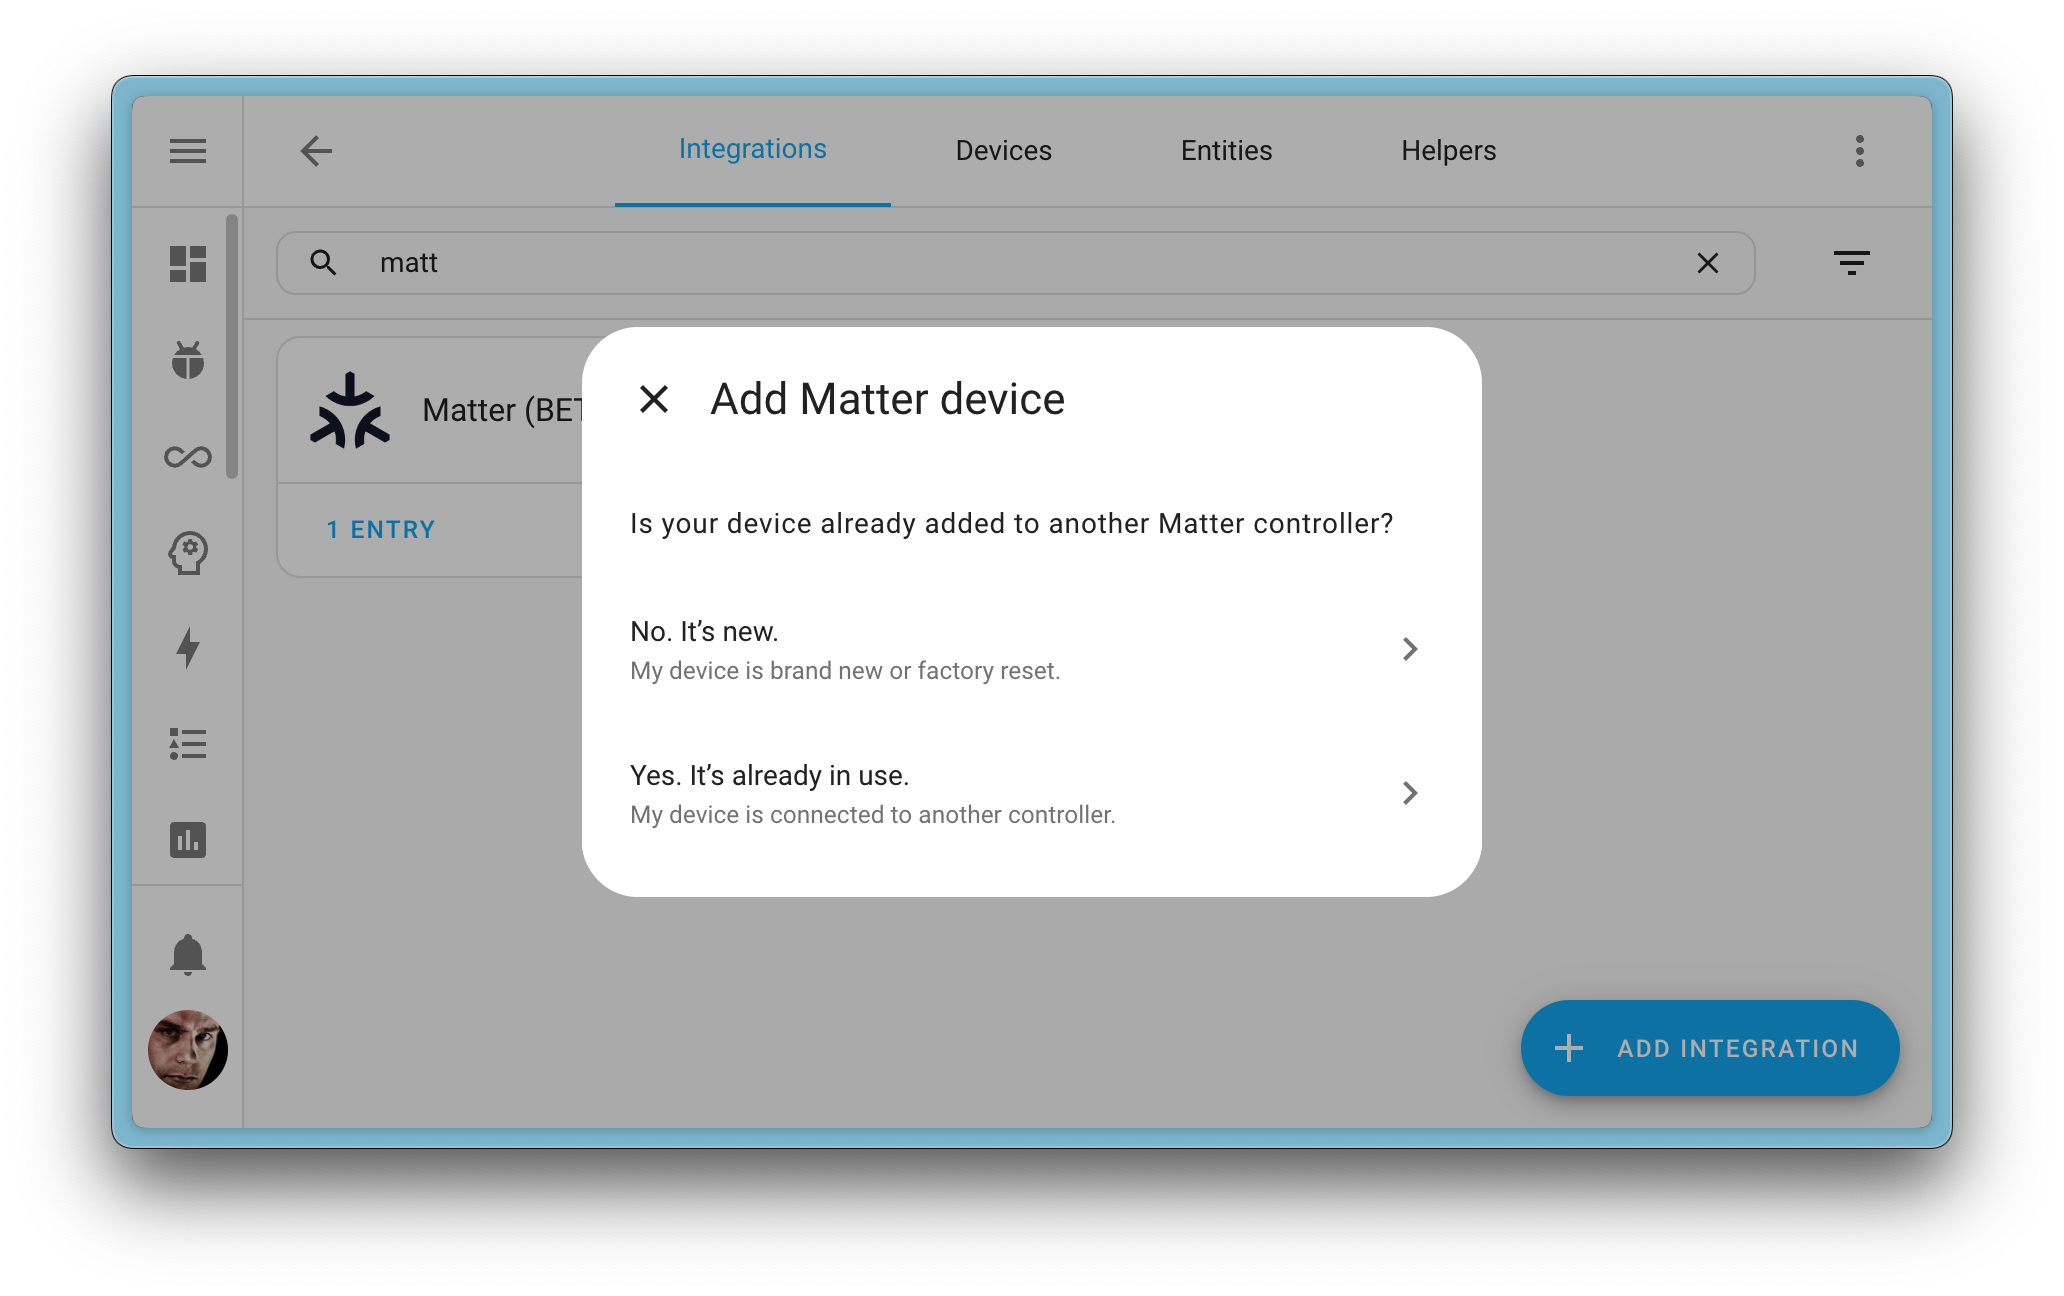 Screenshot showing the dialog to add a Matter device, asking if this is a new or existing matter device connected to another controller.